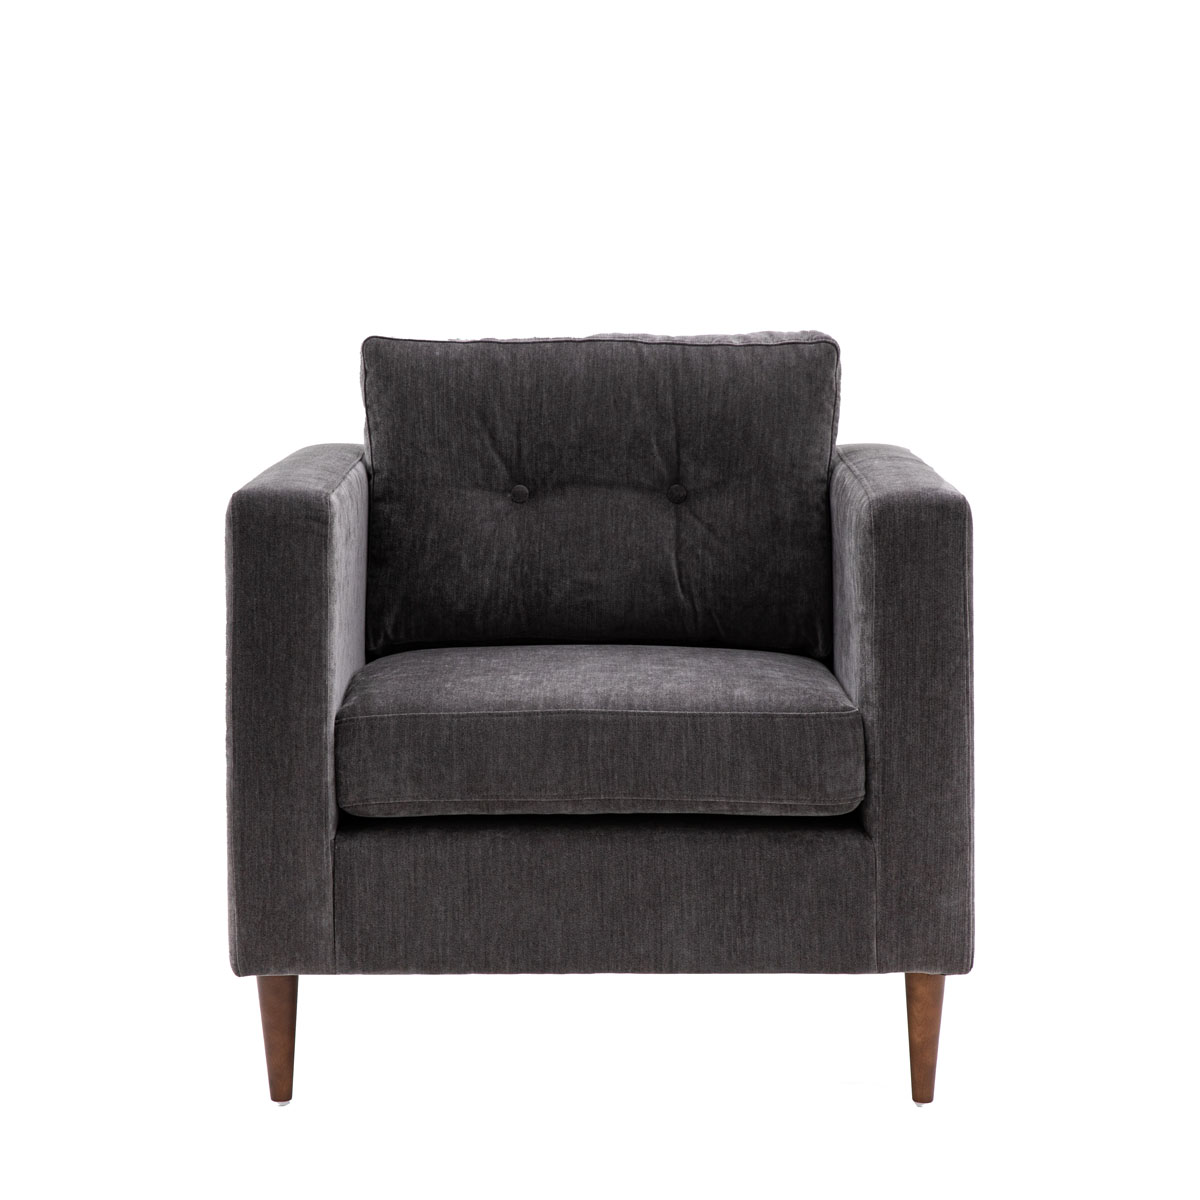 Whitwell Armchair Charcoal 840x860x840mm